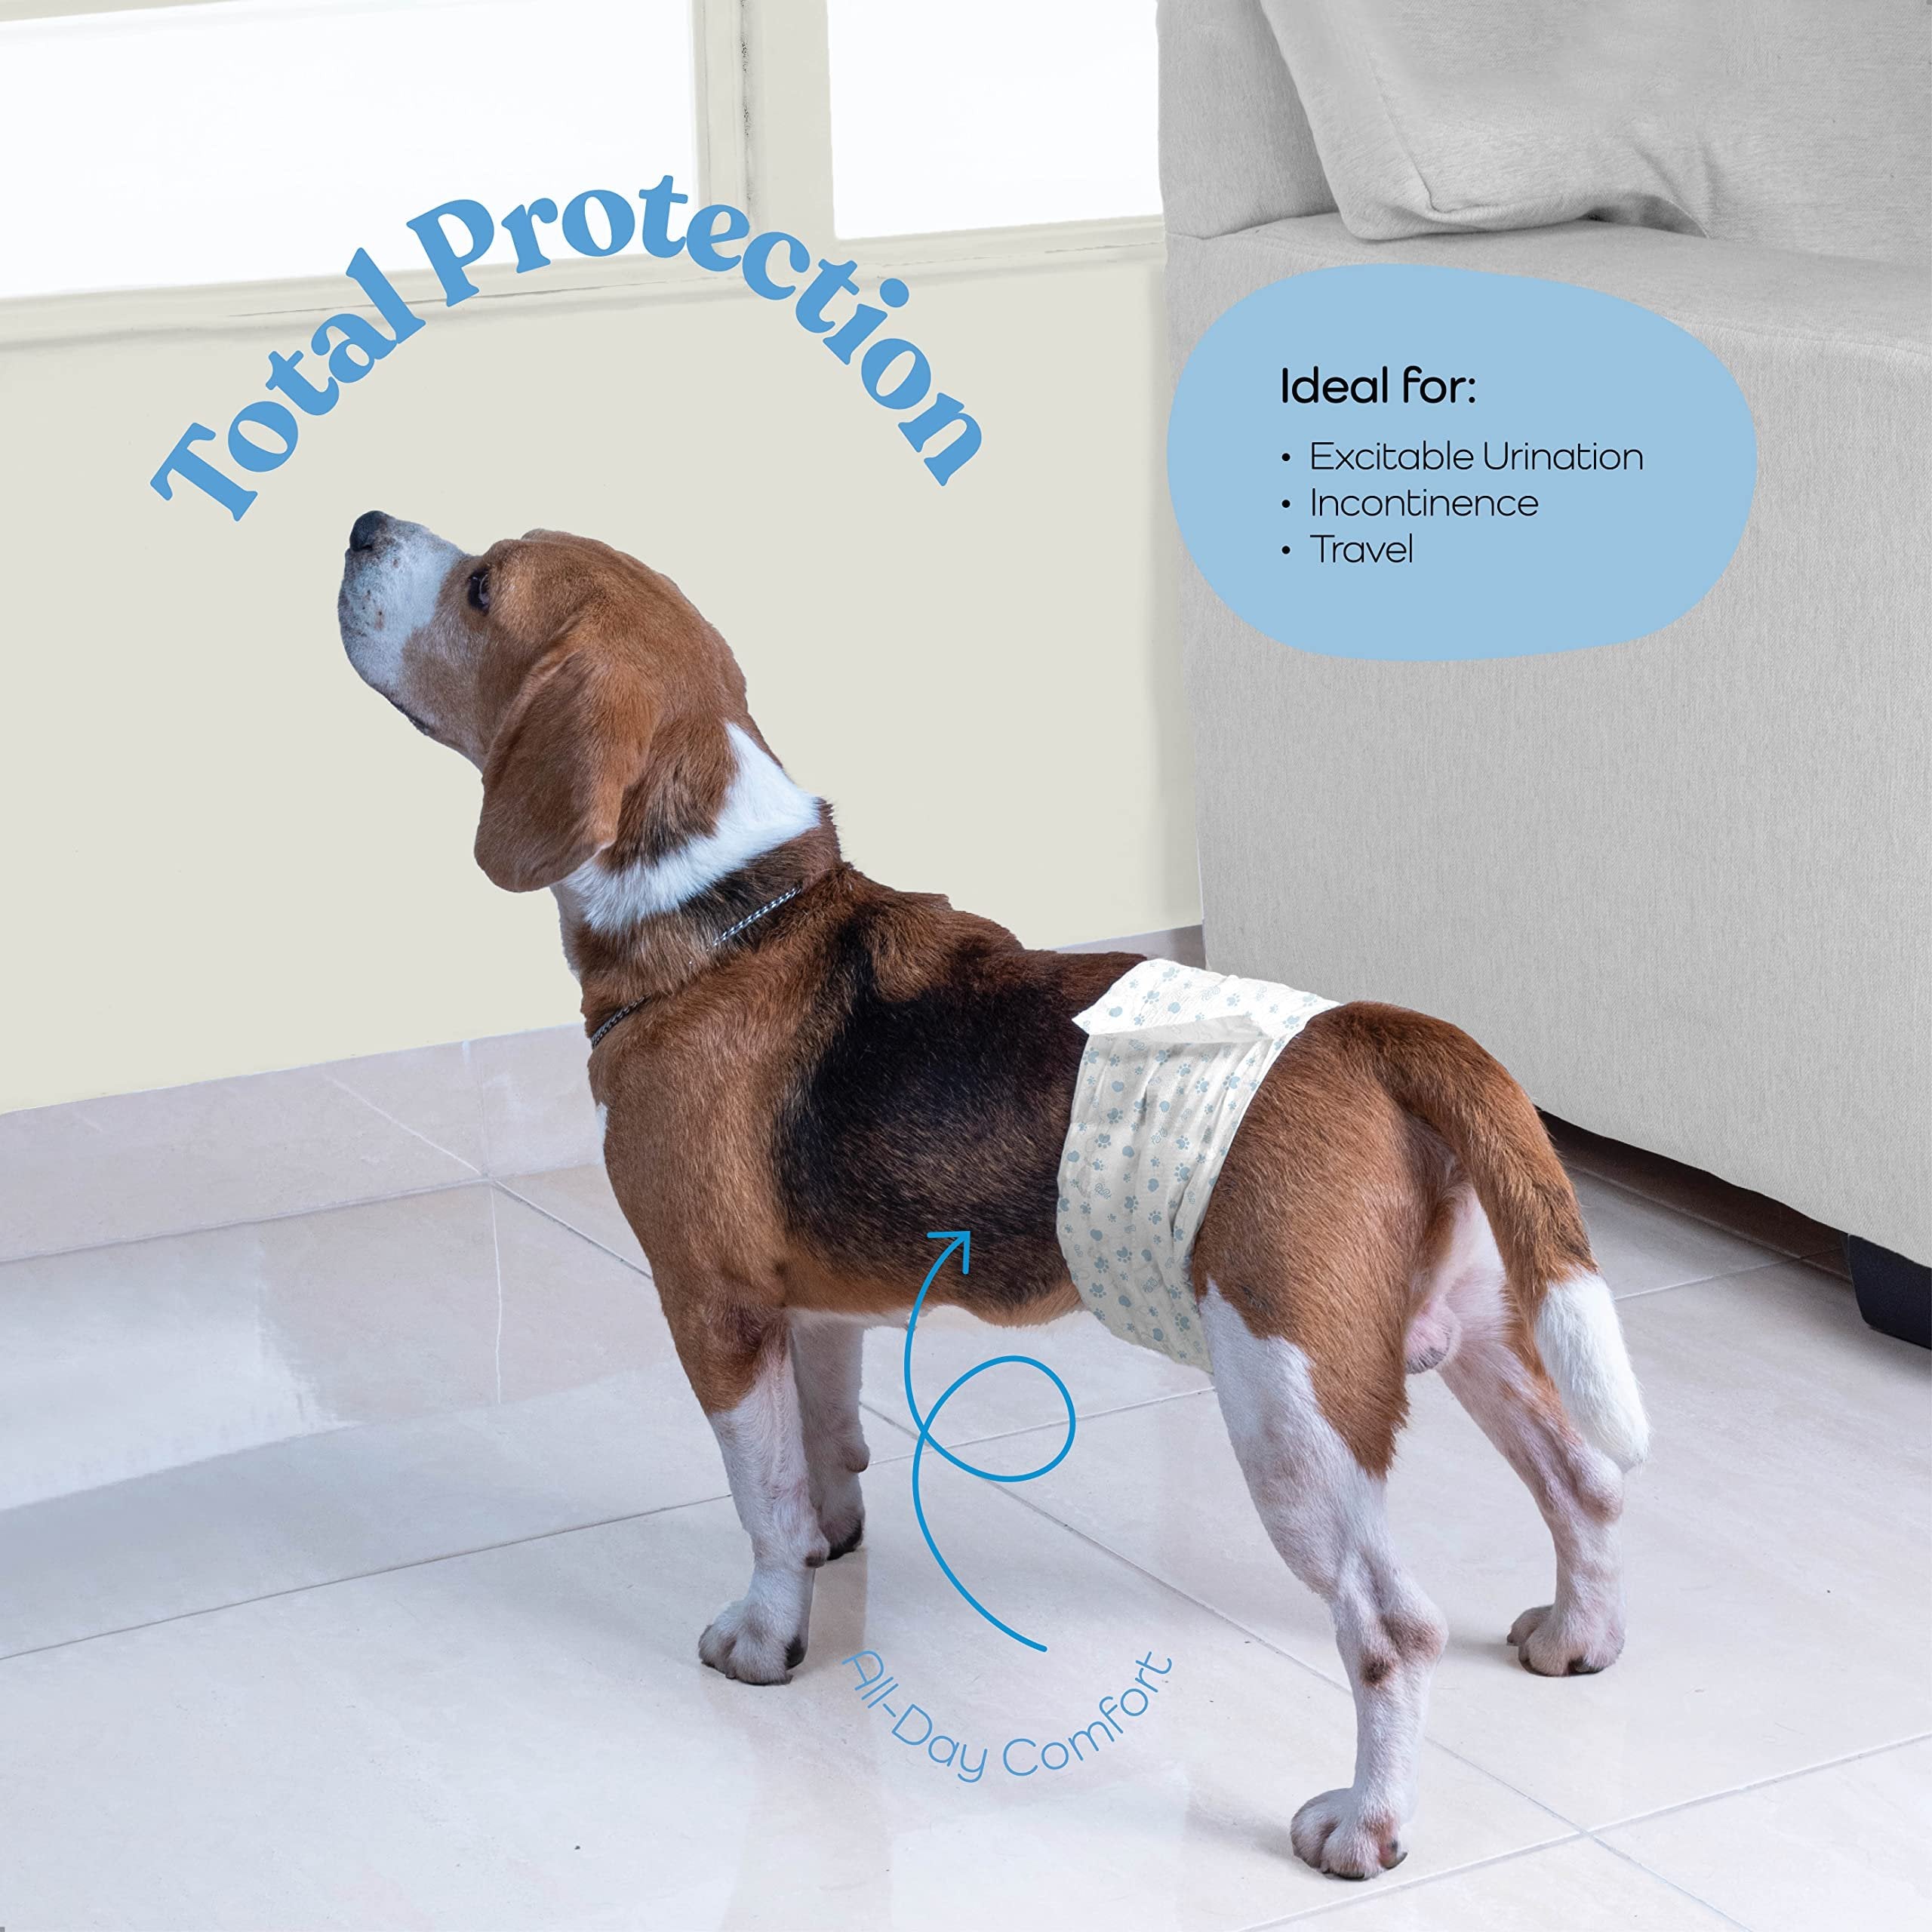 Pitpet Male Dog Diapers - 24-Pack Medium White Disposable Wraps - Super Absorbent with FlashDry Gel Technology & Wetness Indicator - Leakproof Belly Wraps for Incontinence & Excitable Urination